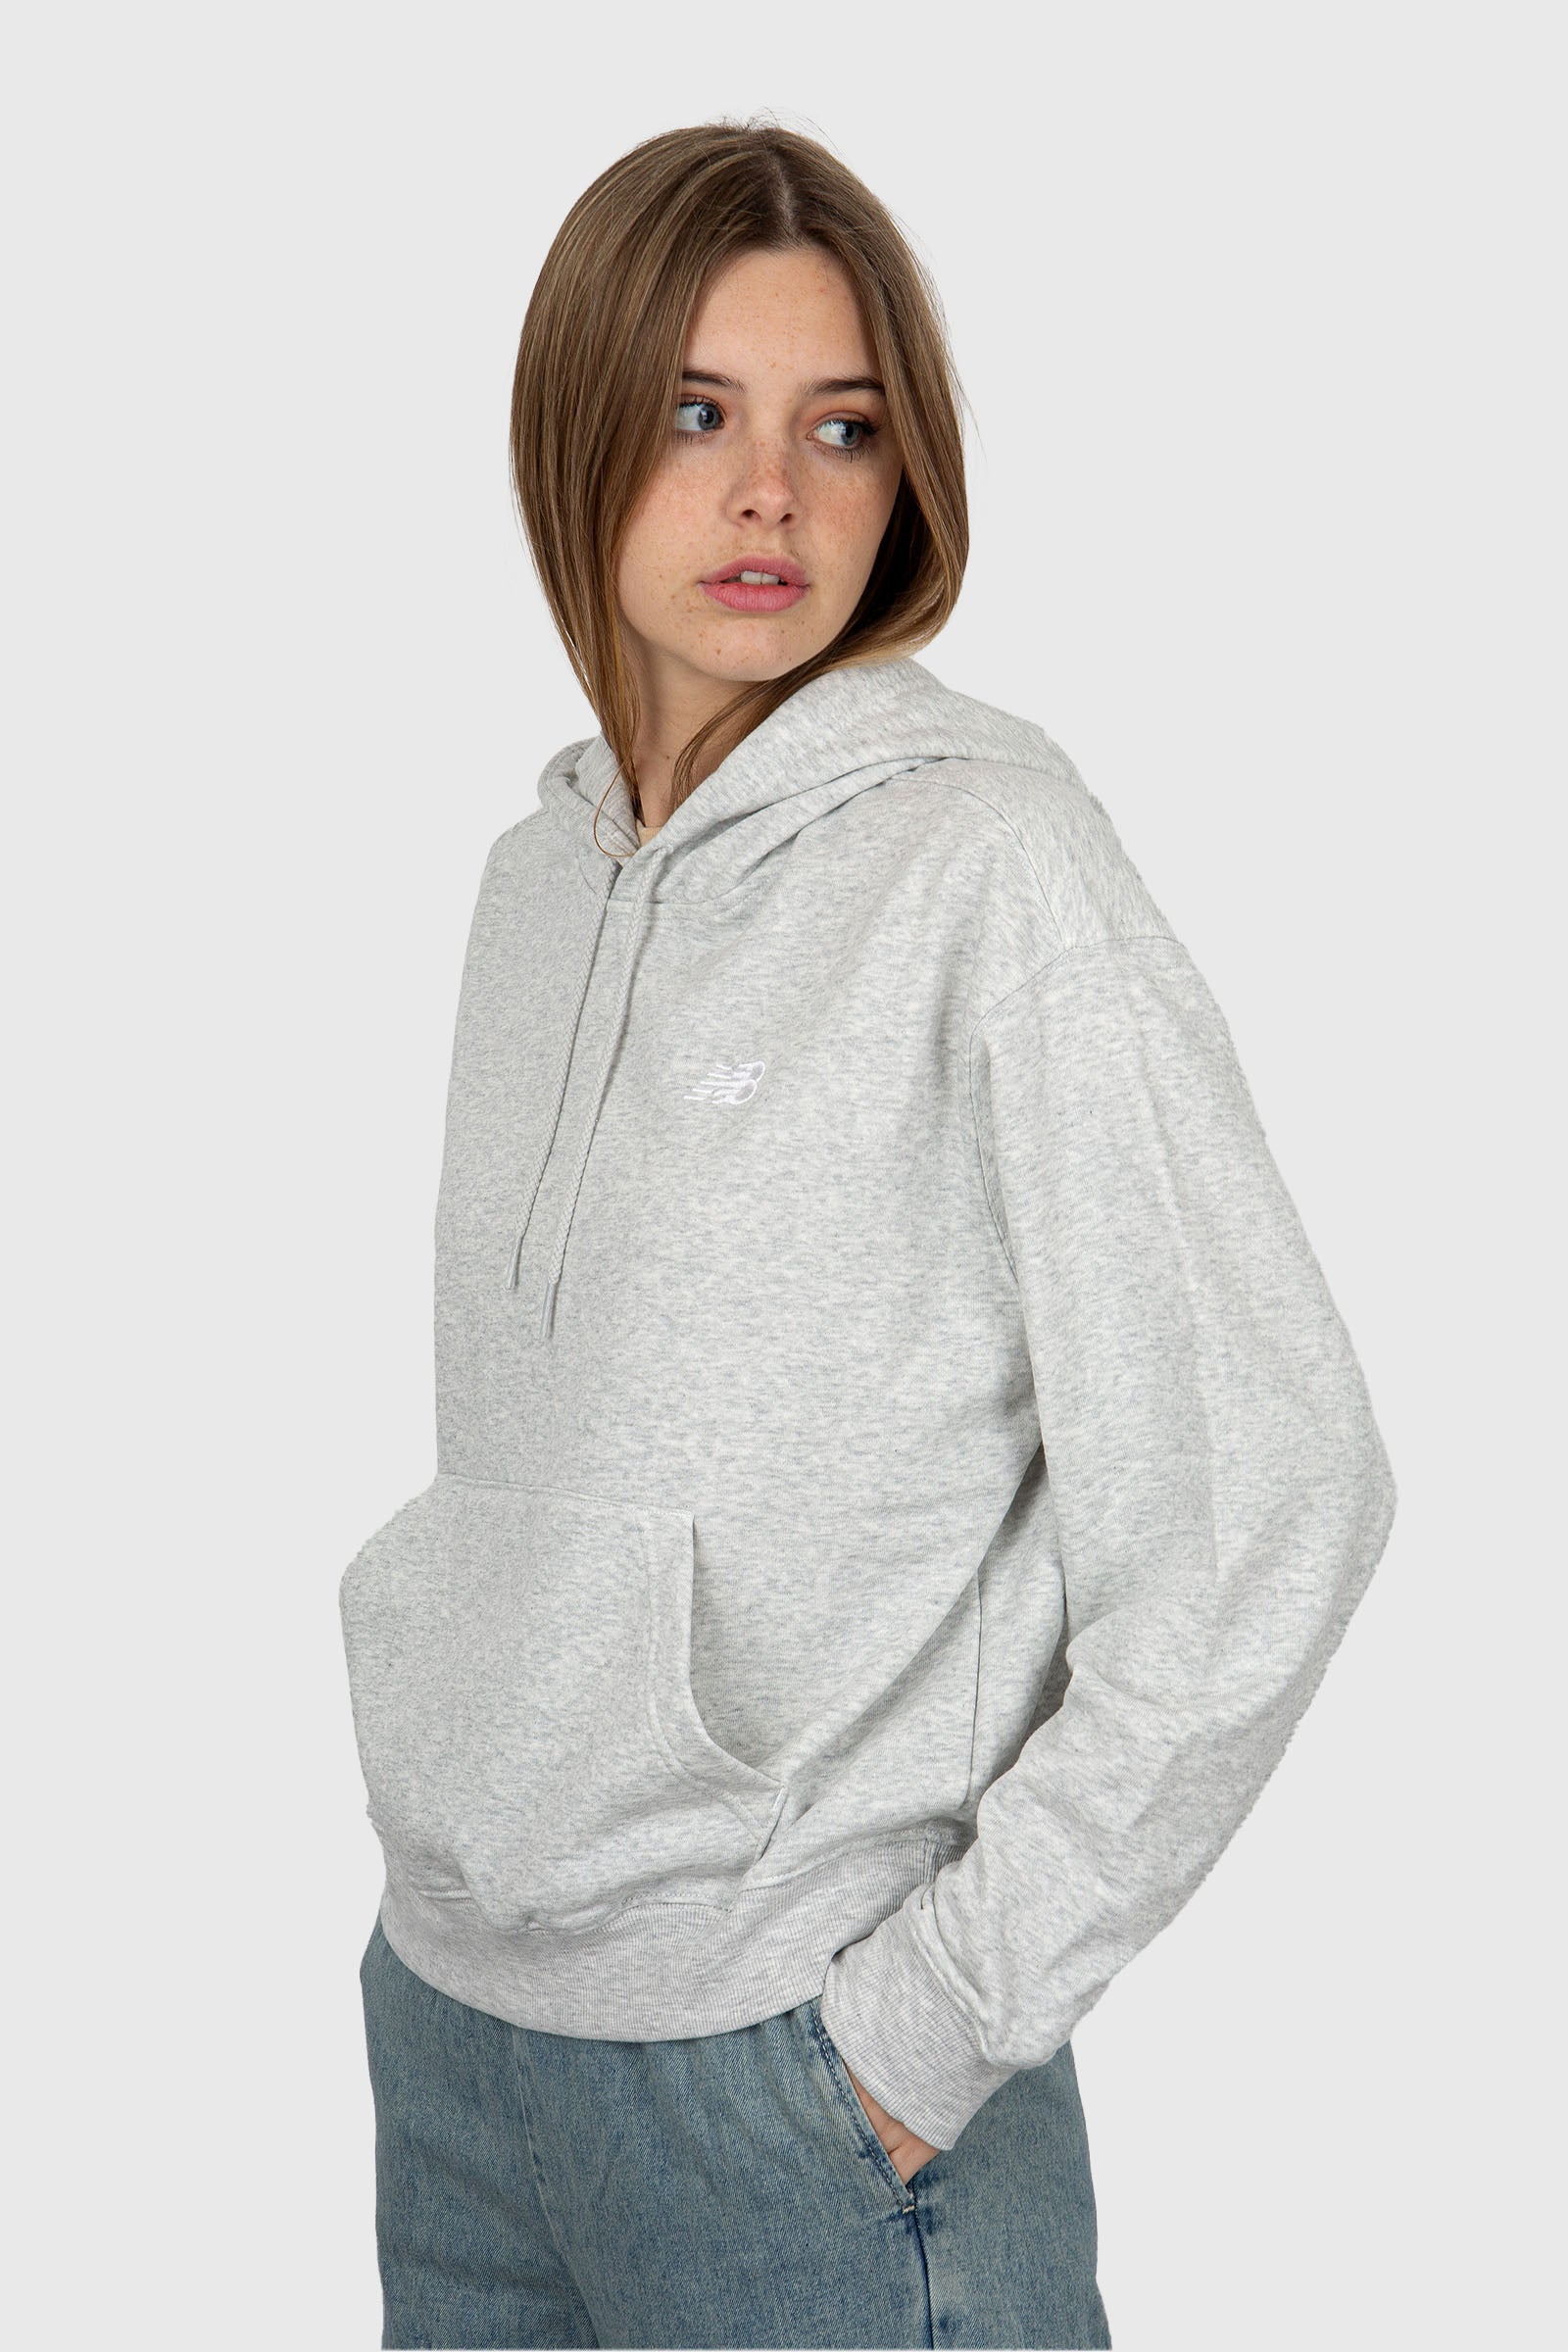 New Balance French Terry Small Logo Hoodie Light Grey Cotton - 3